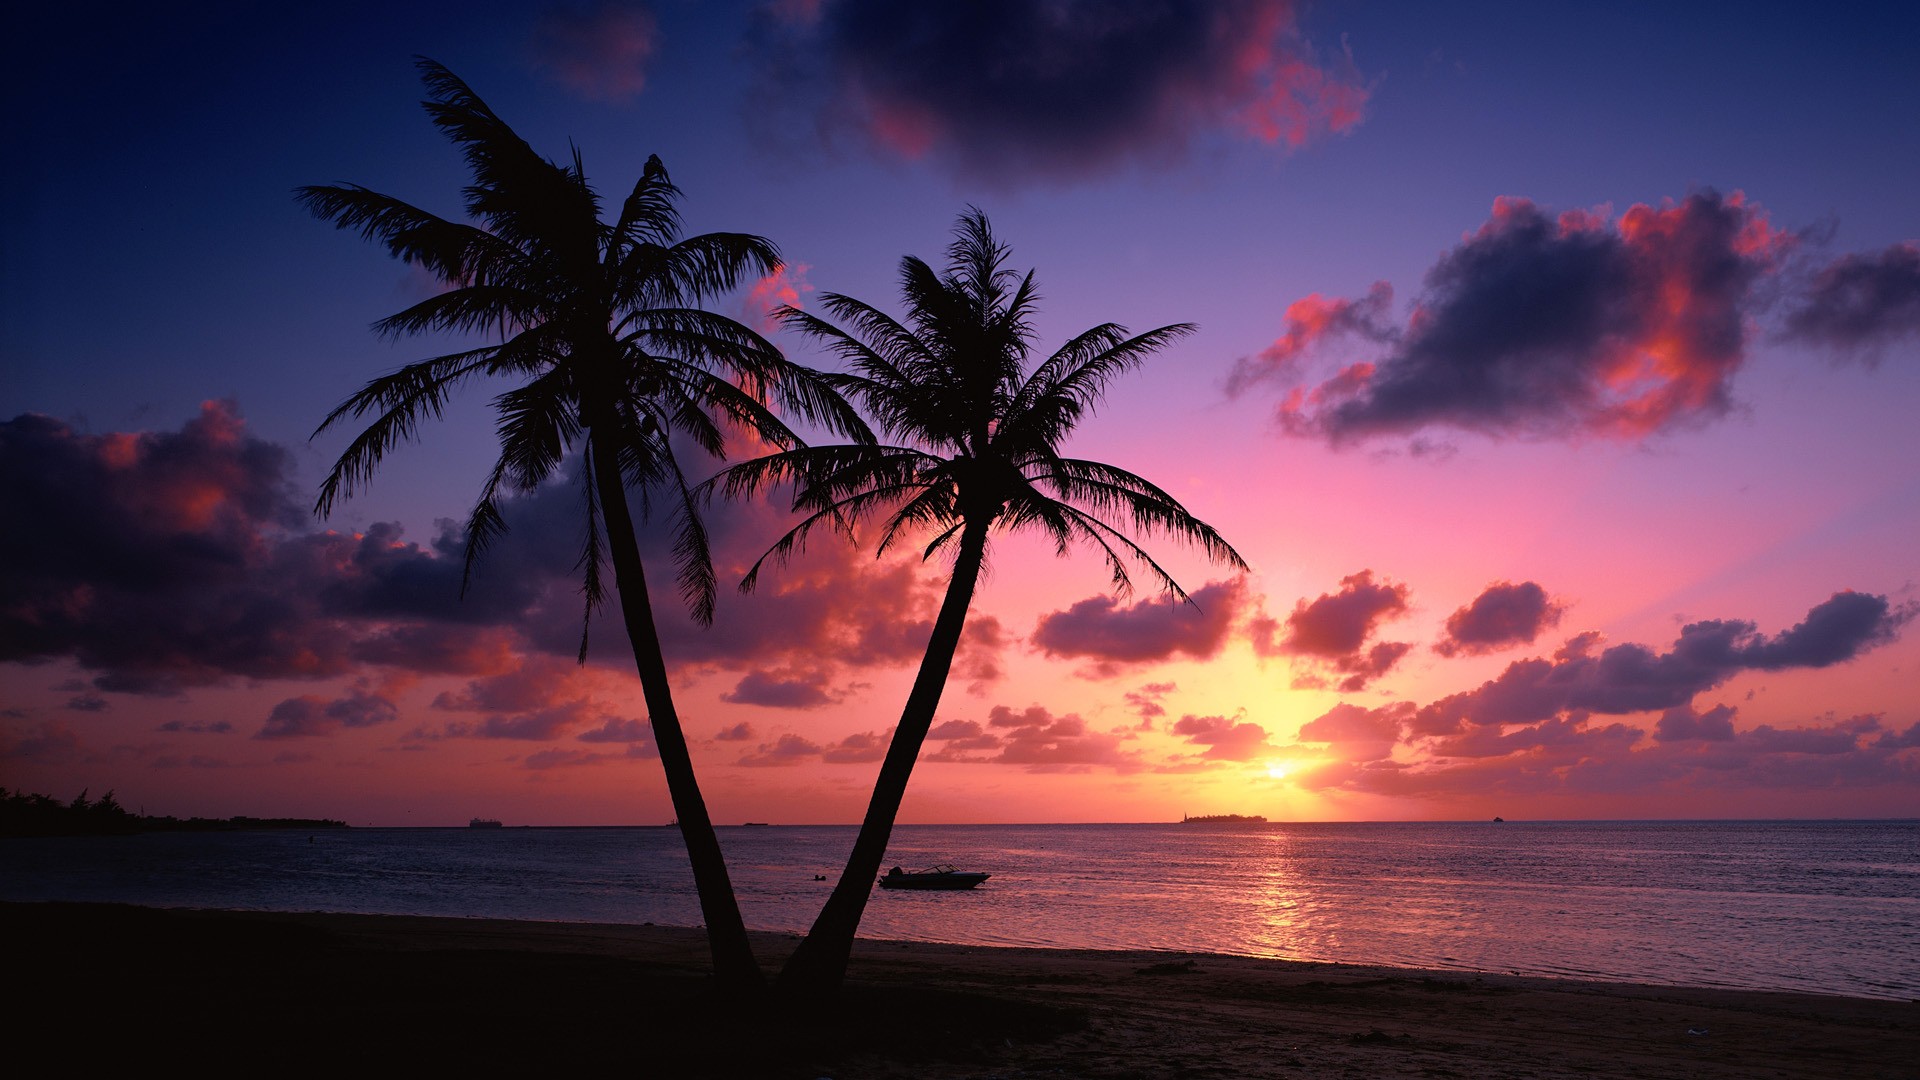 Beach Sunset With Palm Trees HD Wallpaper, Background Images